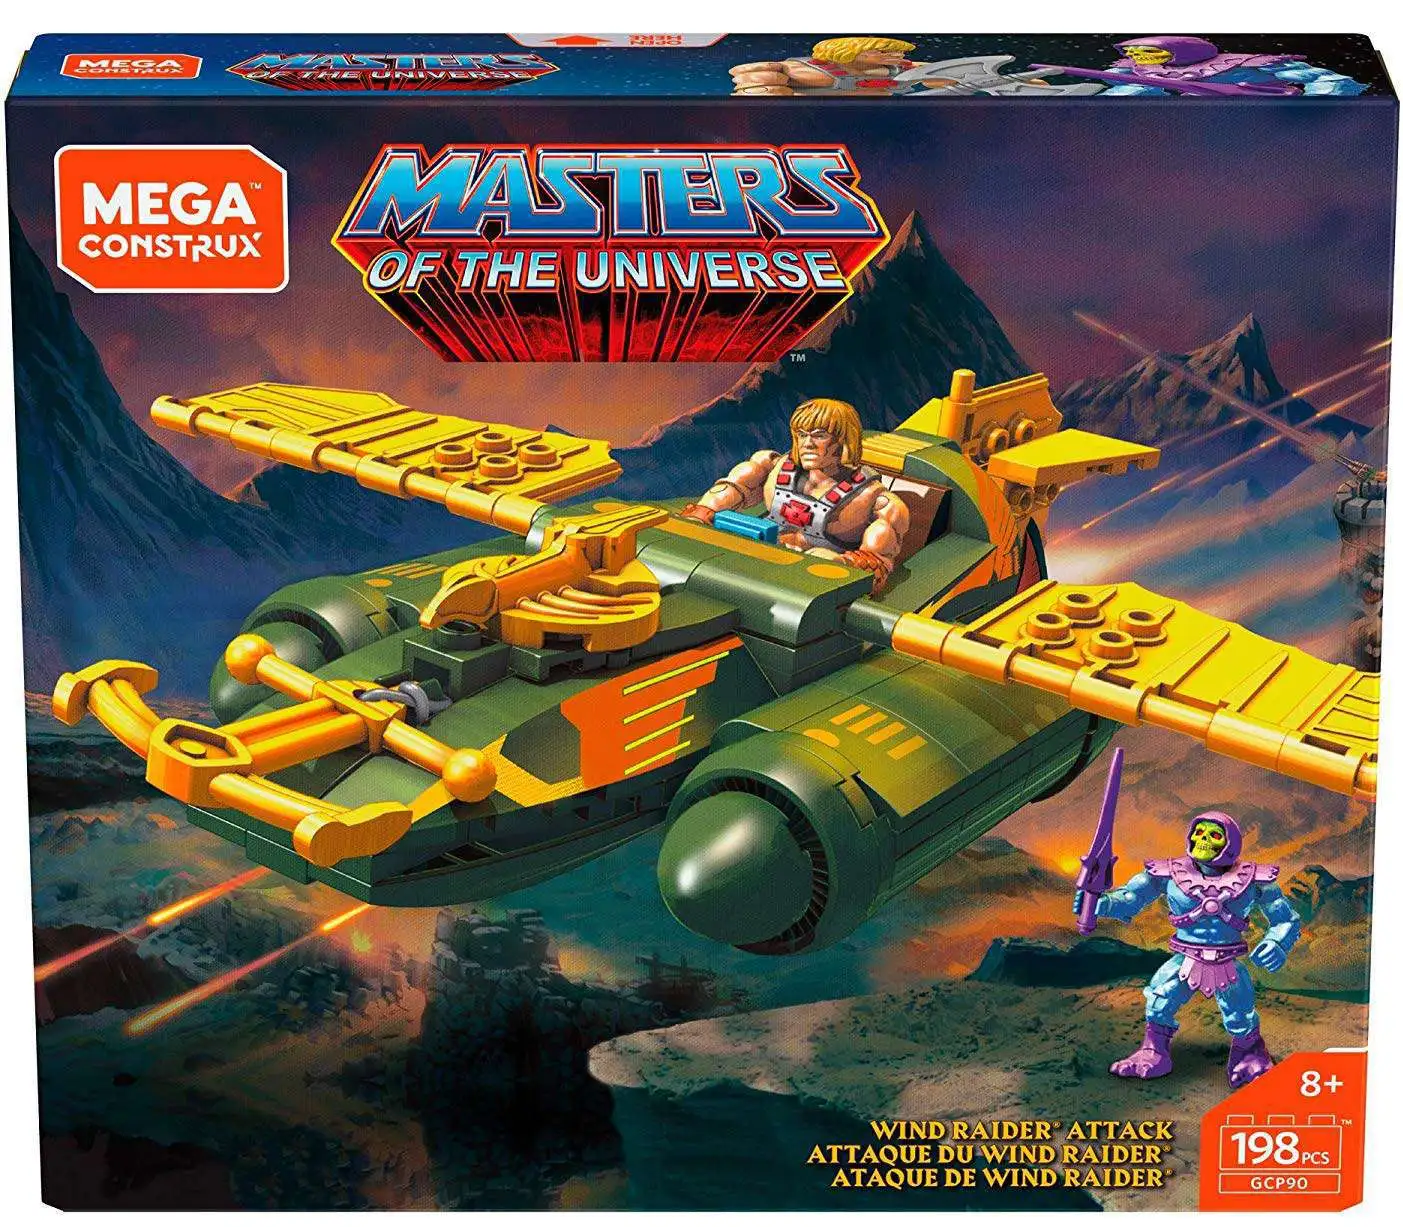 Mega Construx Heroes Masters of the Universe WIND RAIDER ATTACK HE MAN SKELETOR 